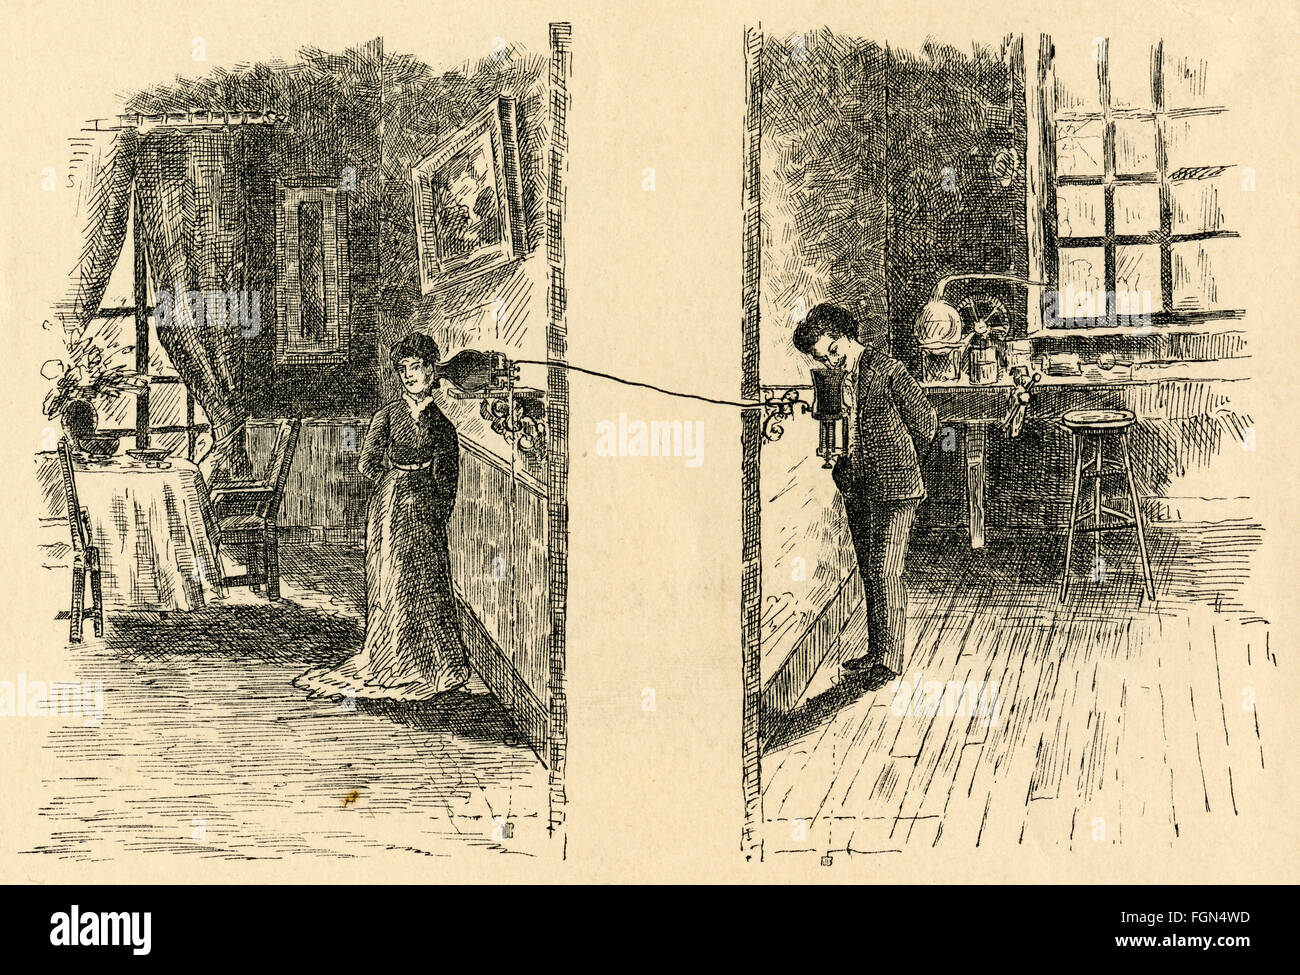 Antique circa 1895 engraving, illustration of a U.S. Patent Electrical Contact Telephone in 1876. Stock Photo